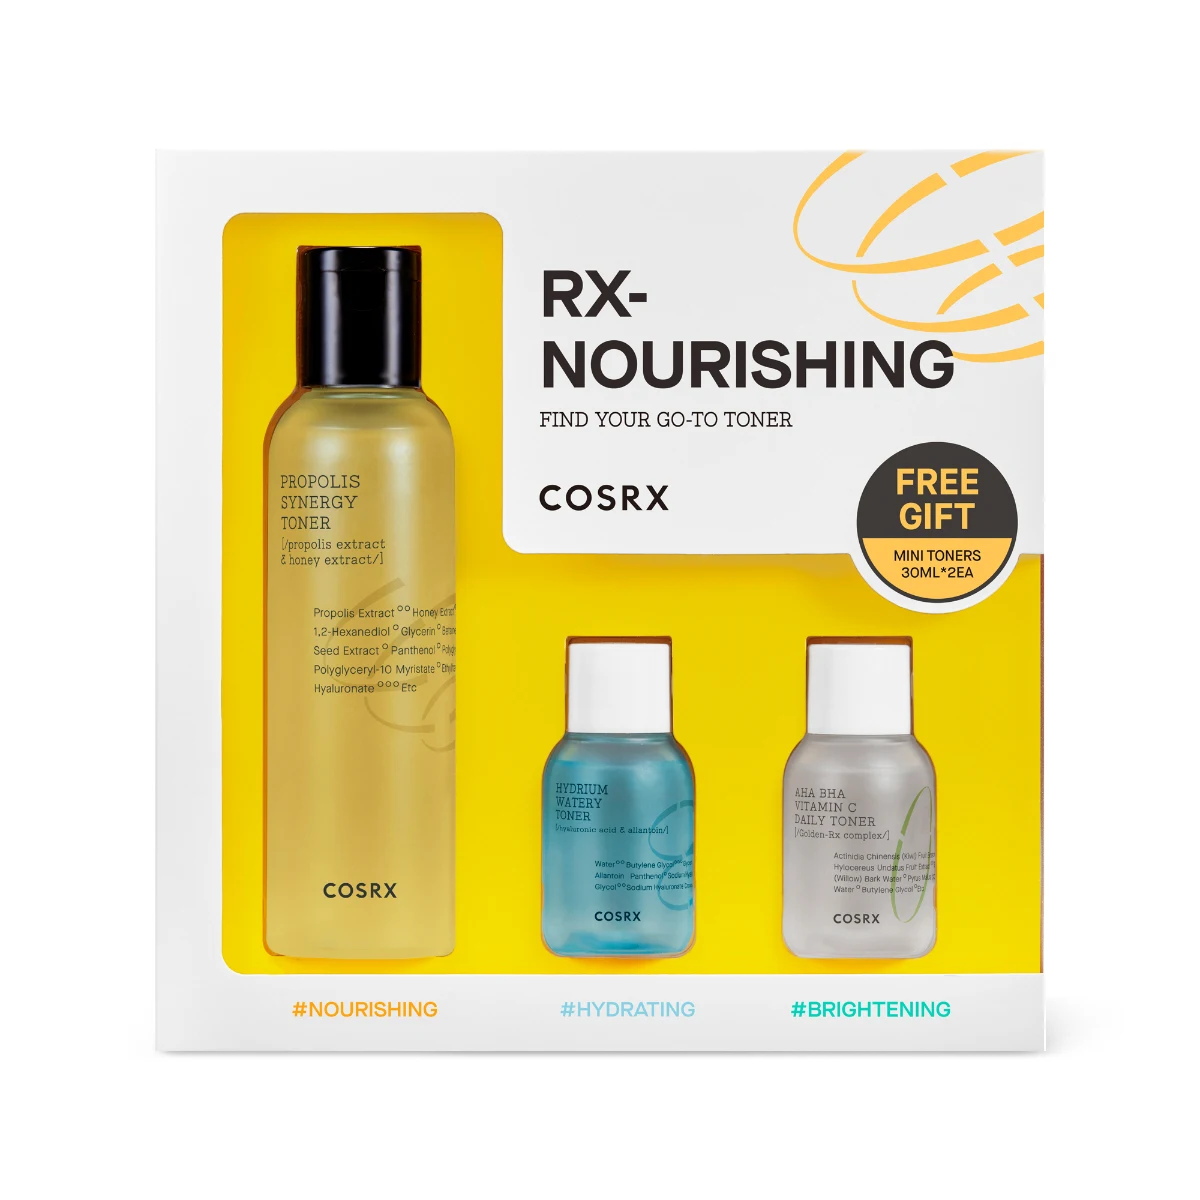 

Travel Skin Care Set Black Bee Propolis Cosrx Korea Cosmetic Product For Women PROMOTION RX NOURISHING FIND YOUR GO TO TONER